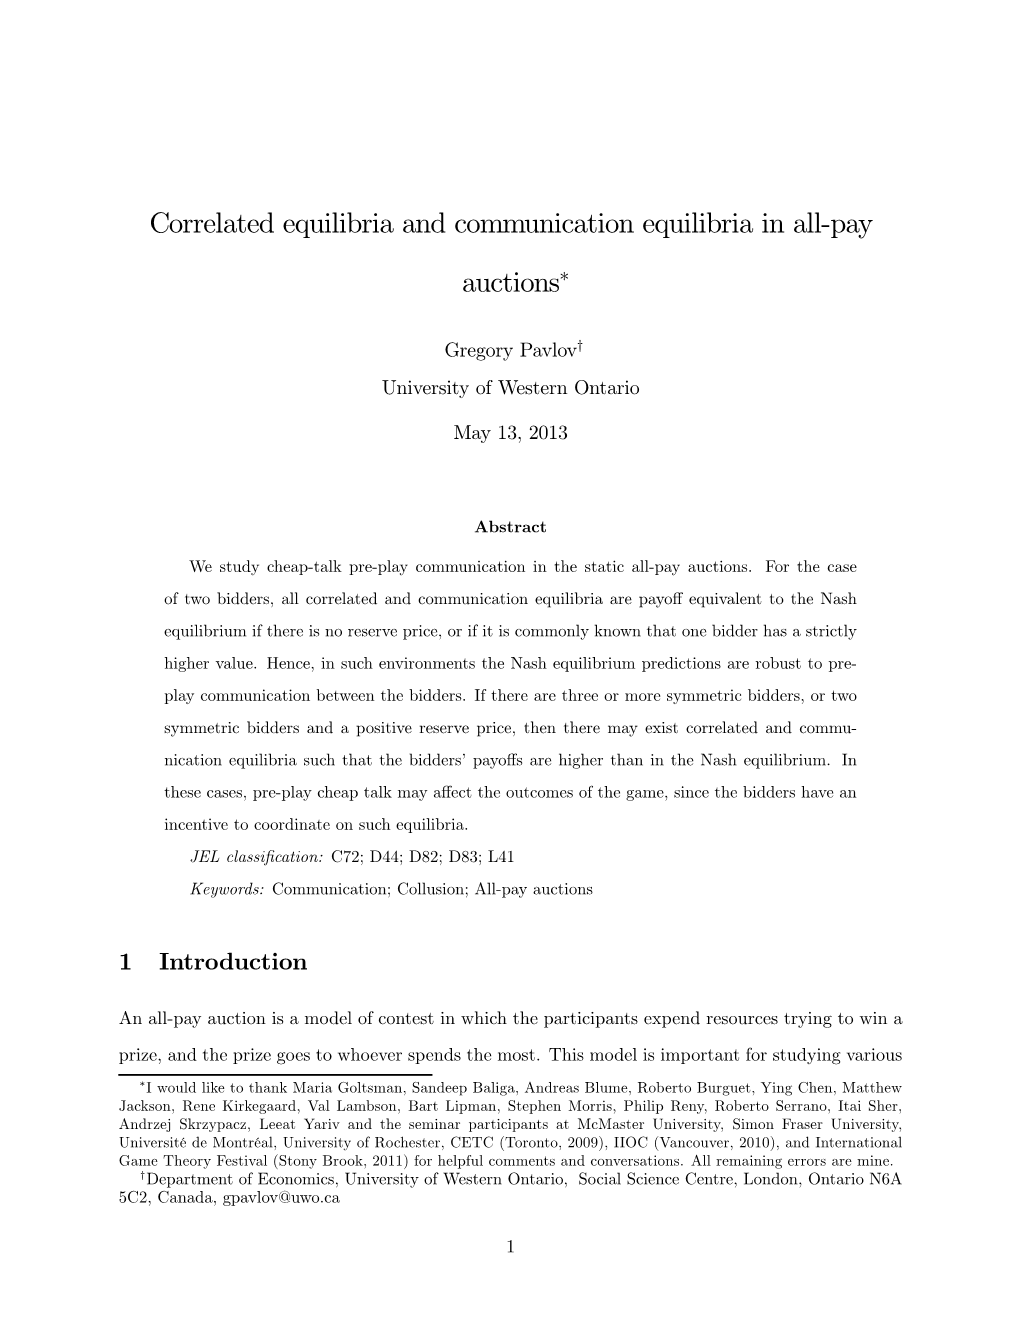 Correlated Equilibria and Communication Equilibria in All-Pay